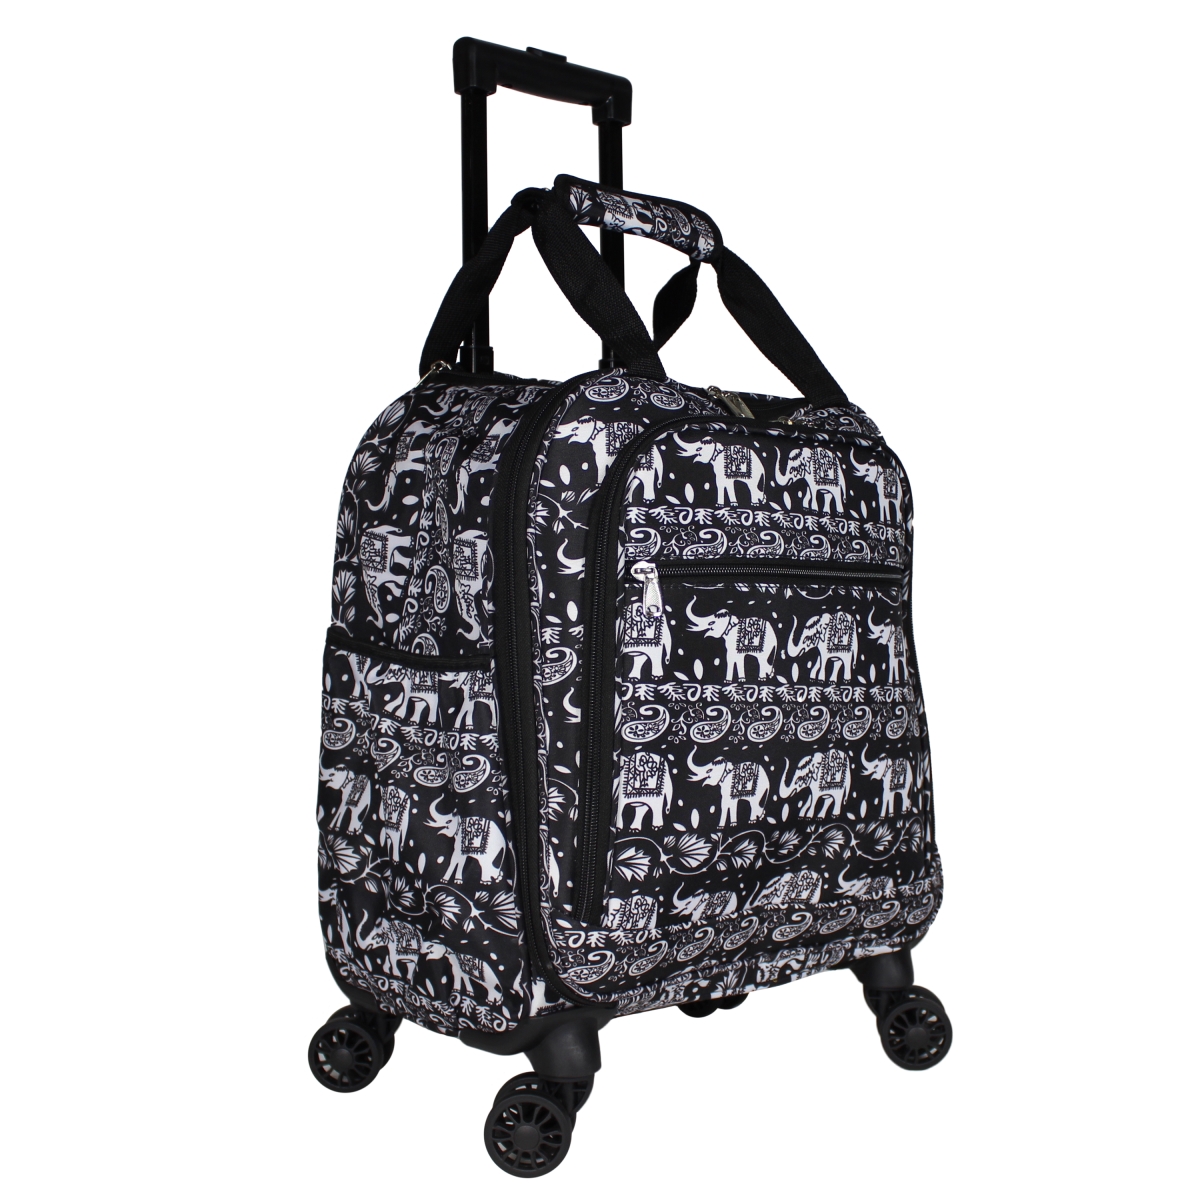 815501-227-b 18 In. Prints Spinner Carry-on Luggage, Black White Elephant